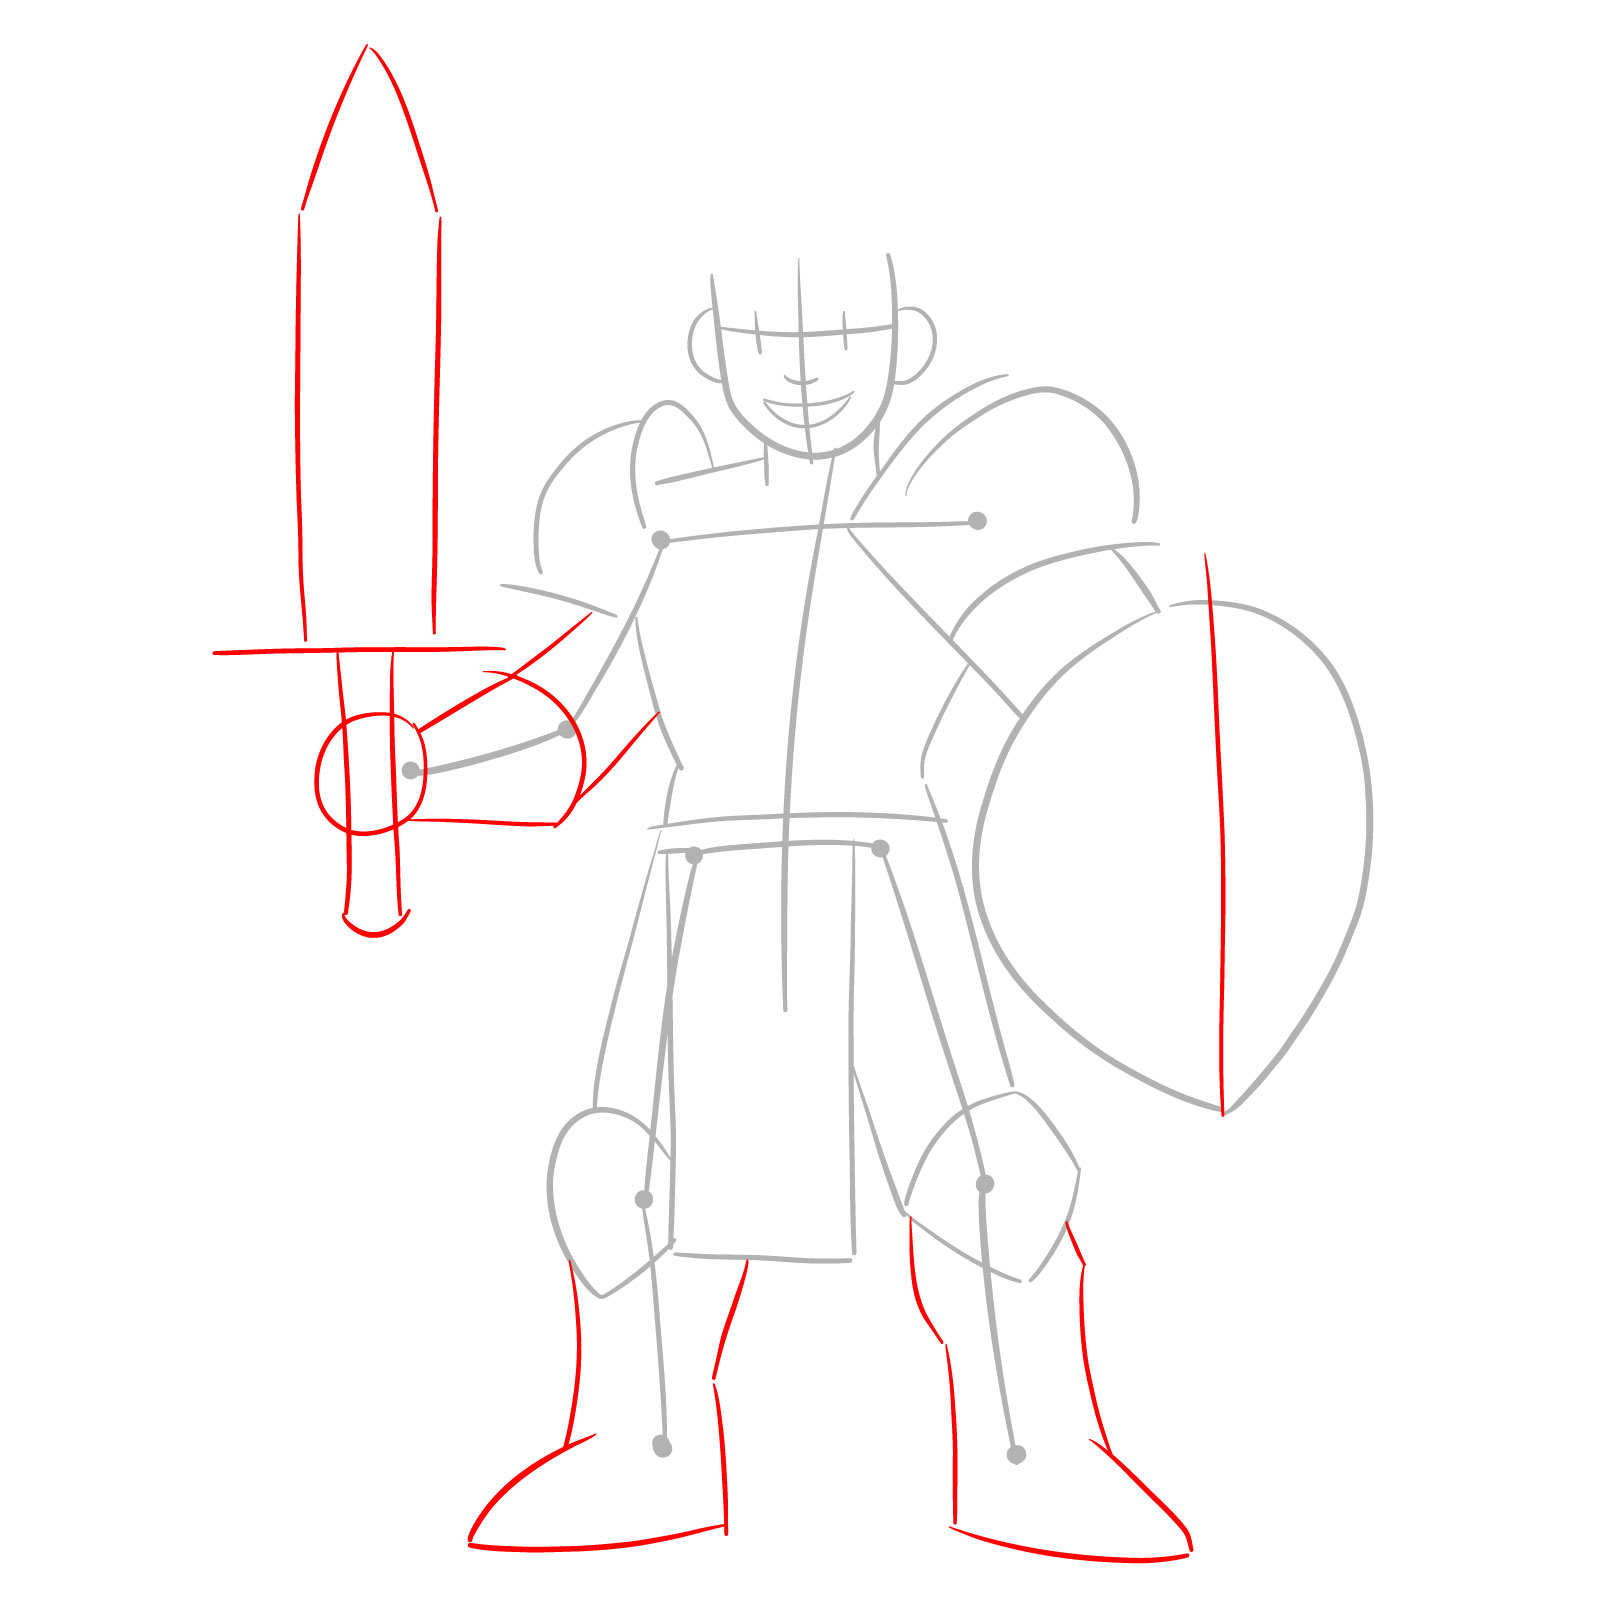 How to draw a paladin step 3: legs, hand, and sword outlines